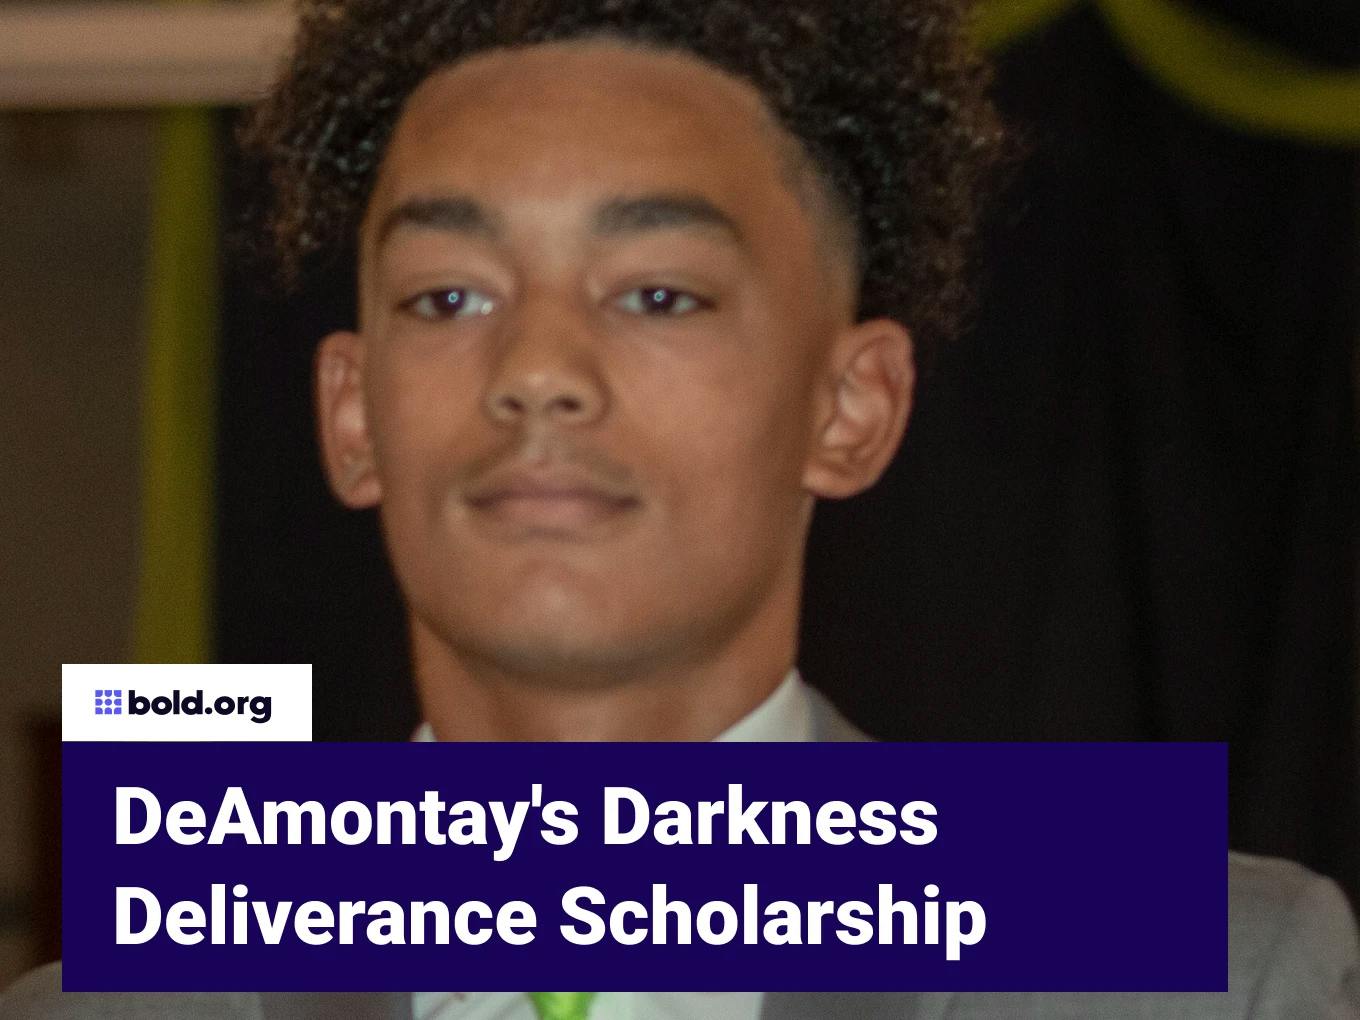 DeAmontay's Darkness Deliverance Scholarship